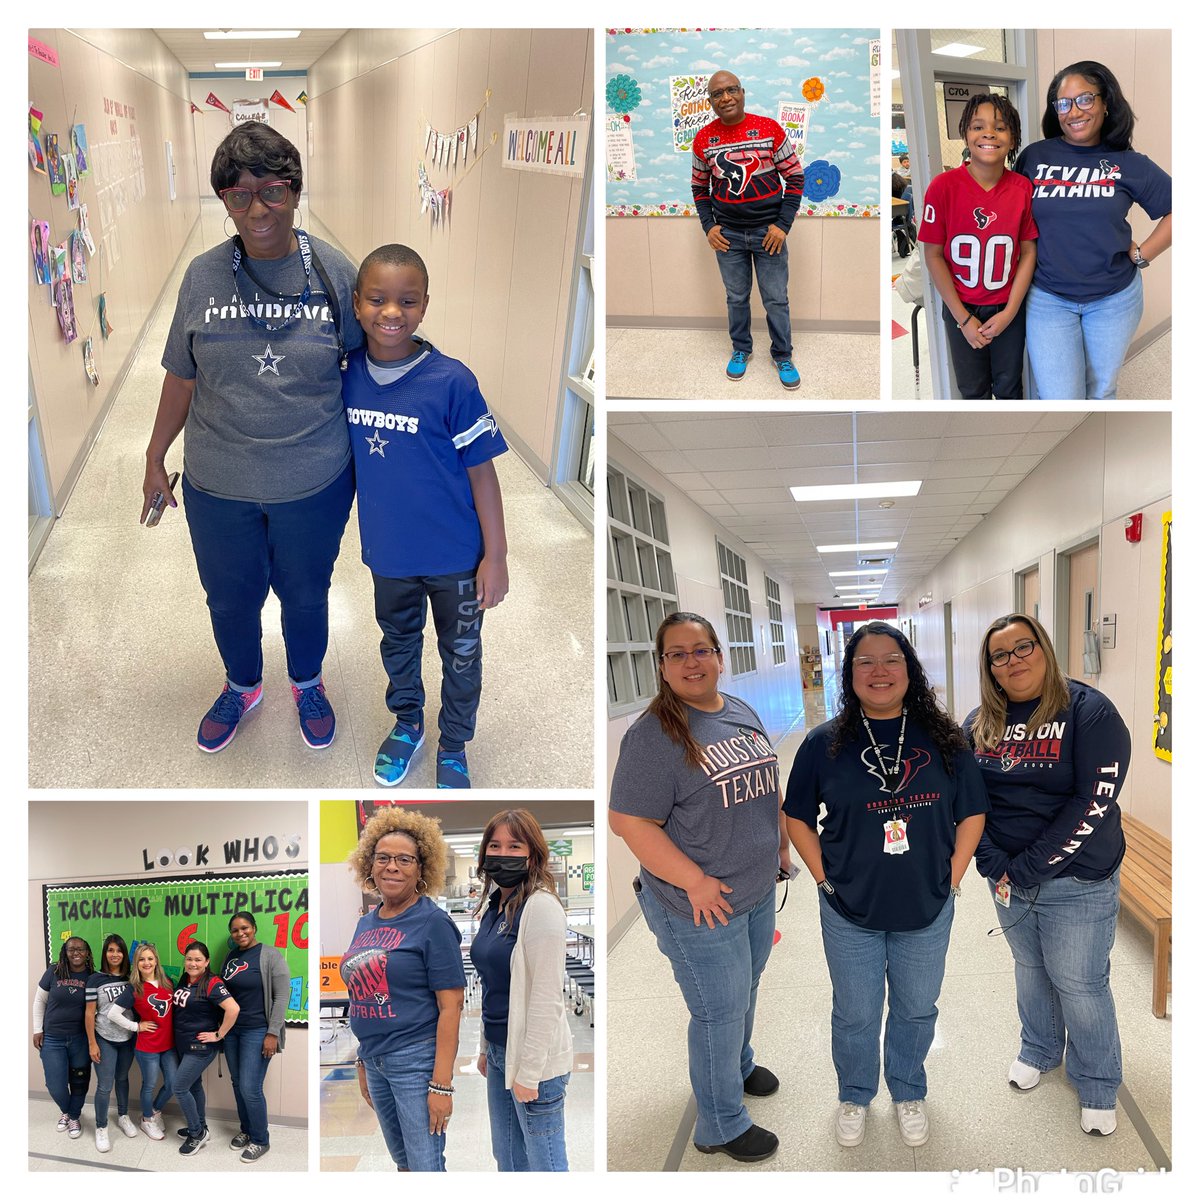 Today was all love for our Texas teams @Hill_AISD ❤️💙 @whiteconstance1 @AldineISD